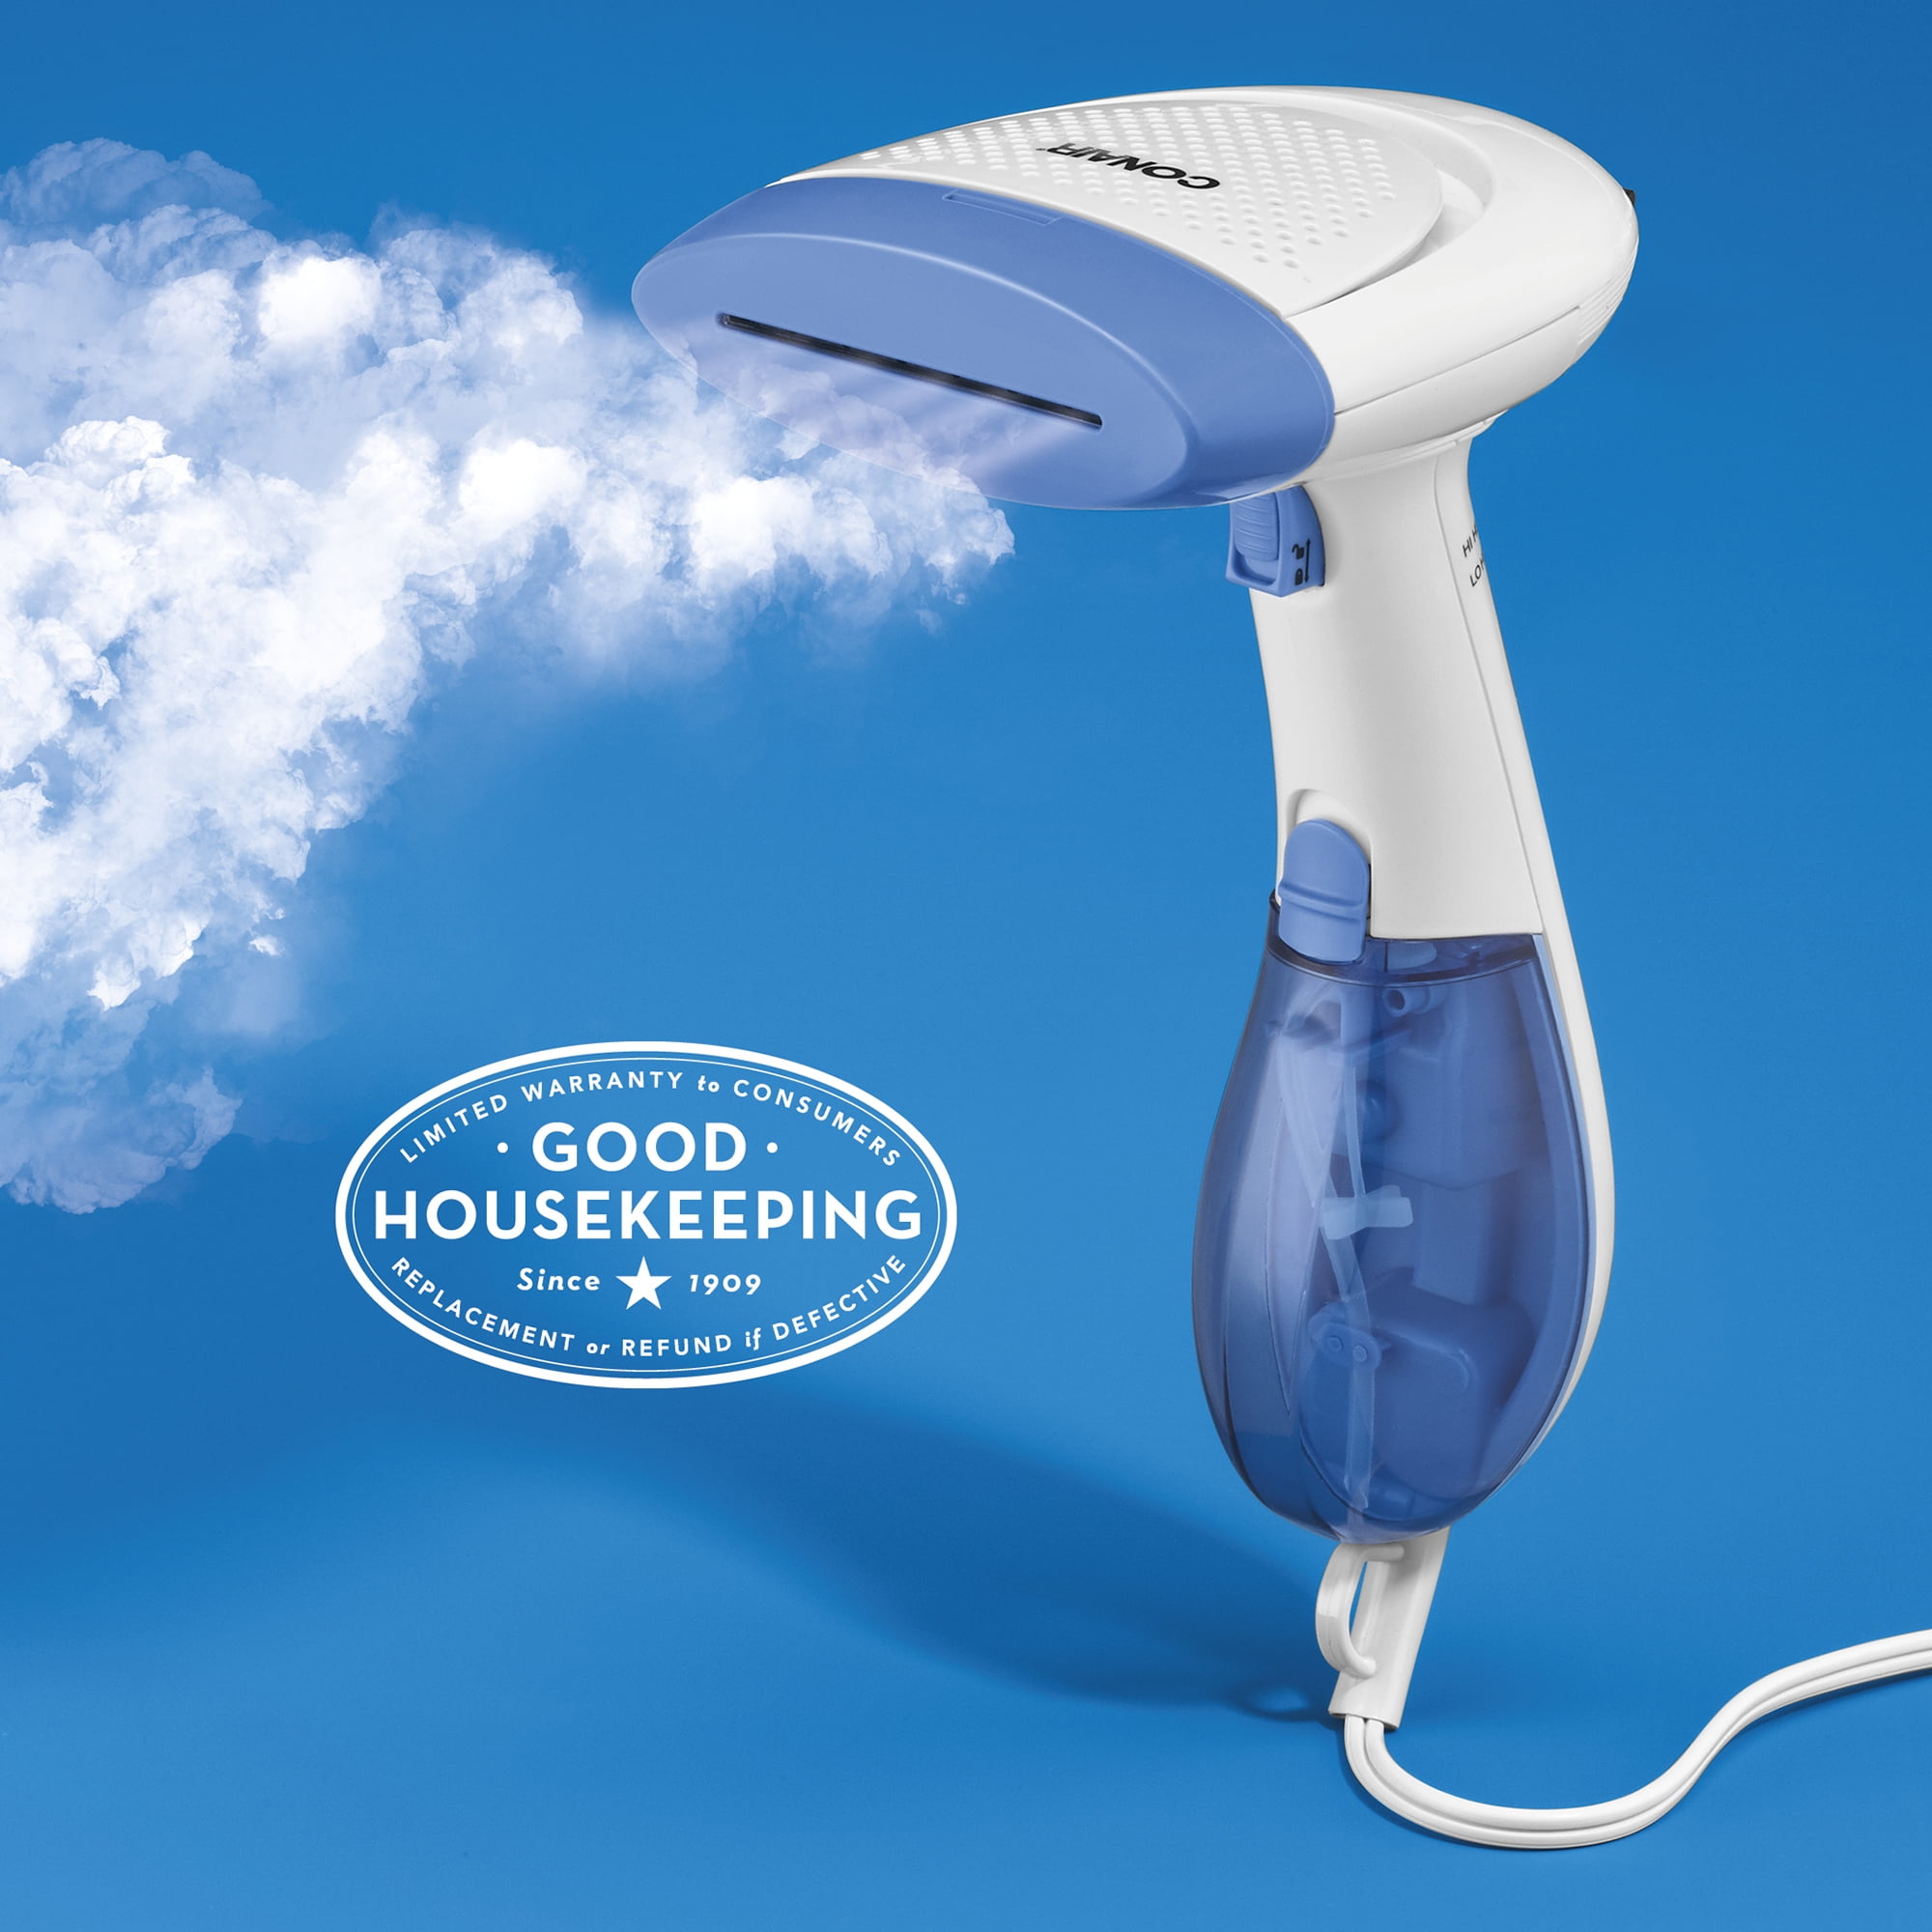 Conair Extreme Steam Fabric Steamer With Dual Heat for sale online